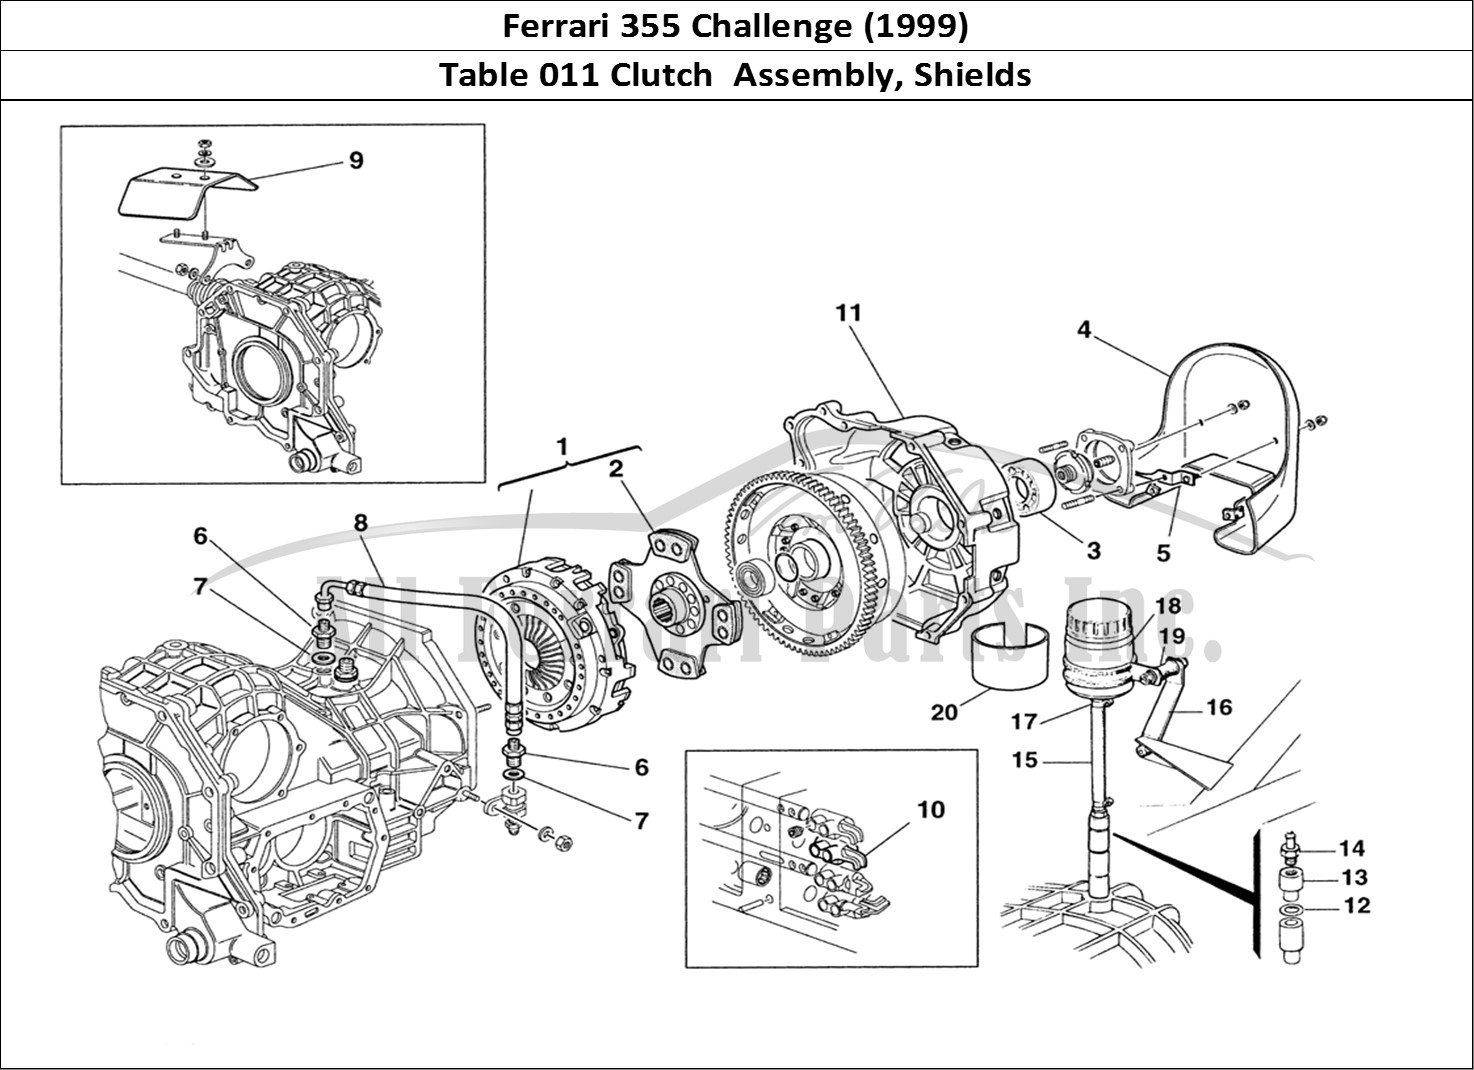 Ferrari Parts Ferrari 355 Challenge (1999) Page 011 Clutch Assembly and Heat